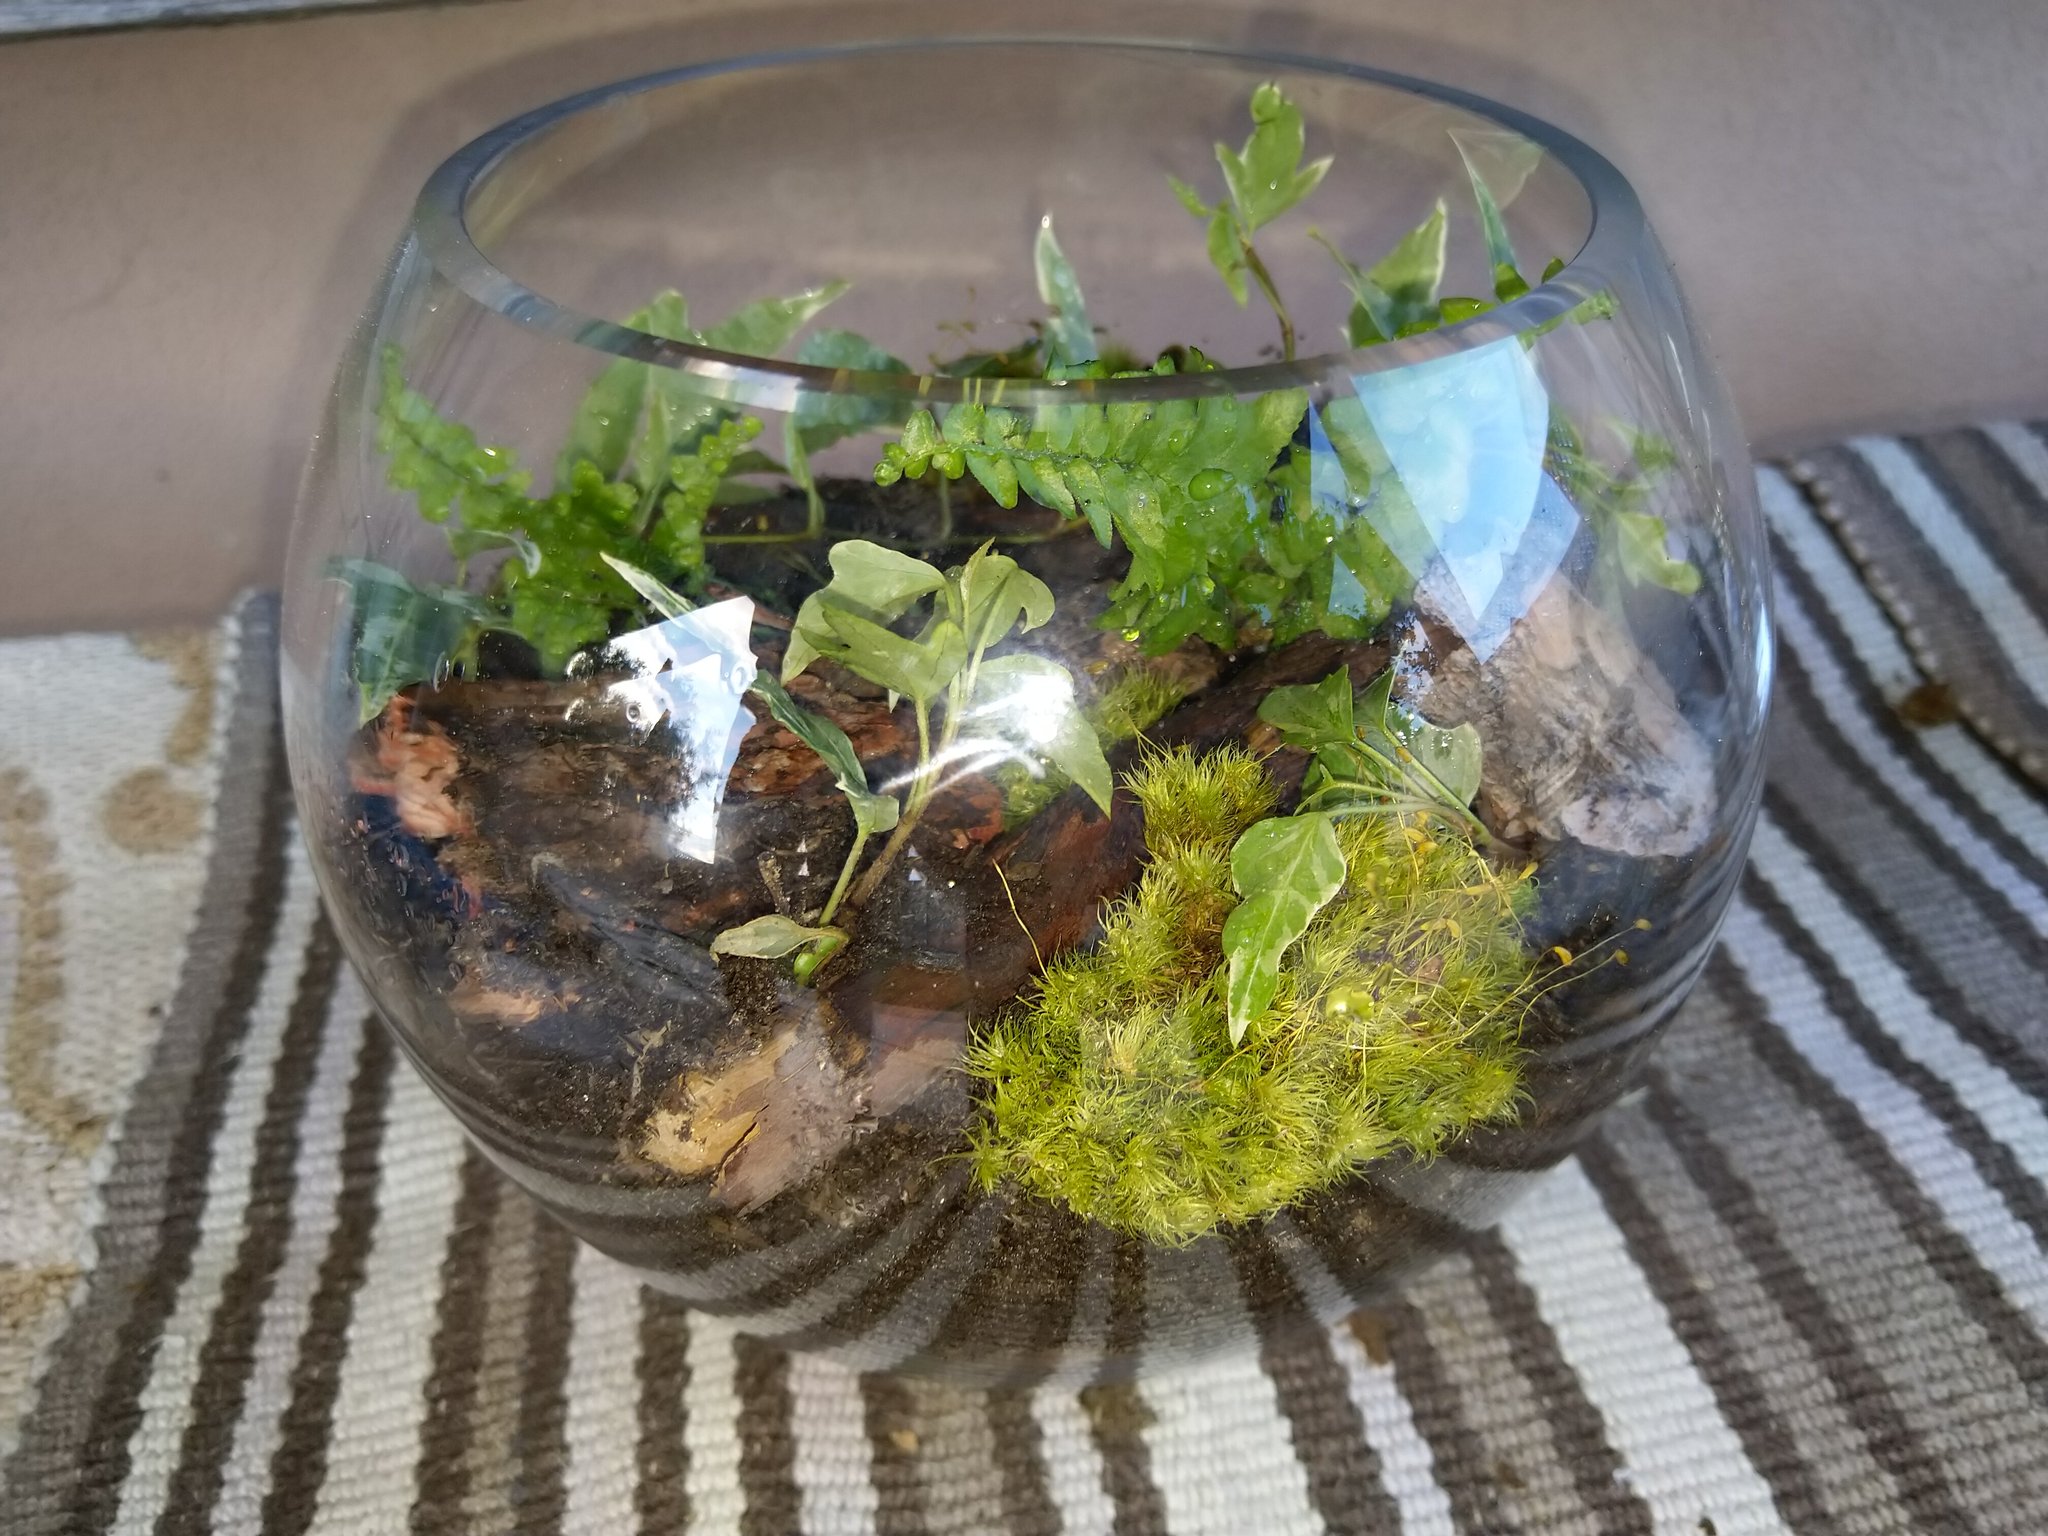 Twitter 上的TMPS："Finally made the terrarium today! Was just waiting on some charcoal to up 👀 The little are A. Vulgare that me and my SO found while getting rid